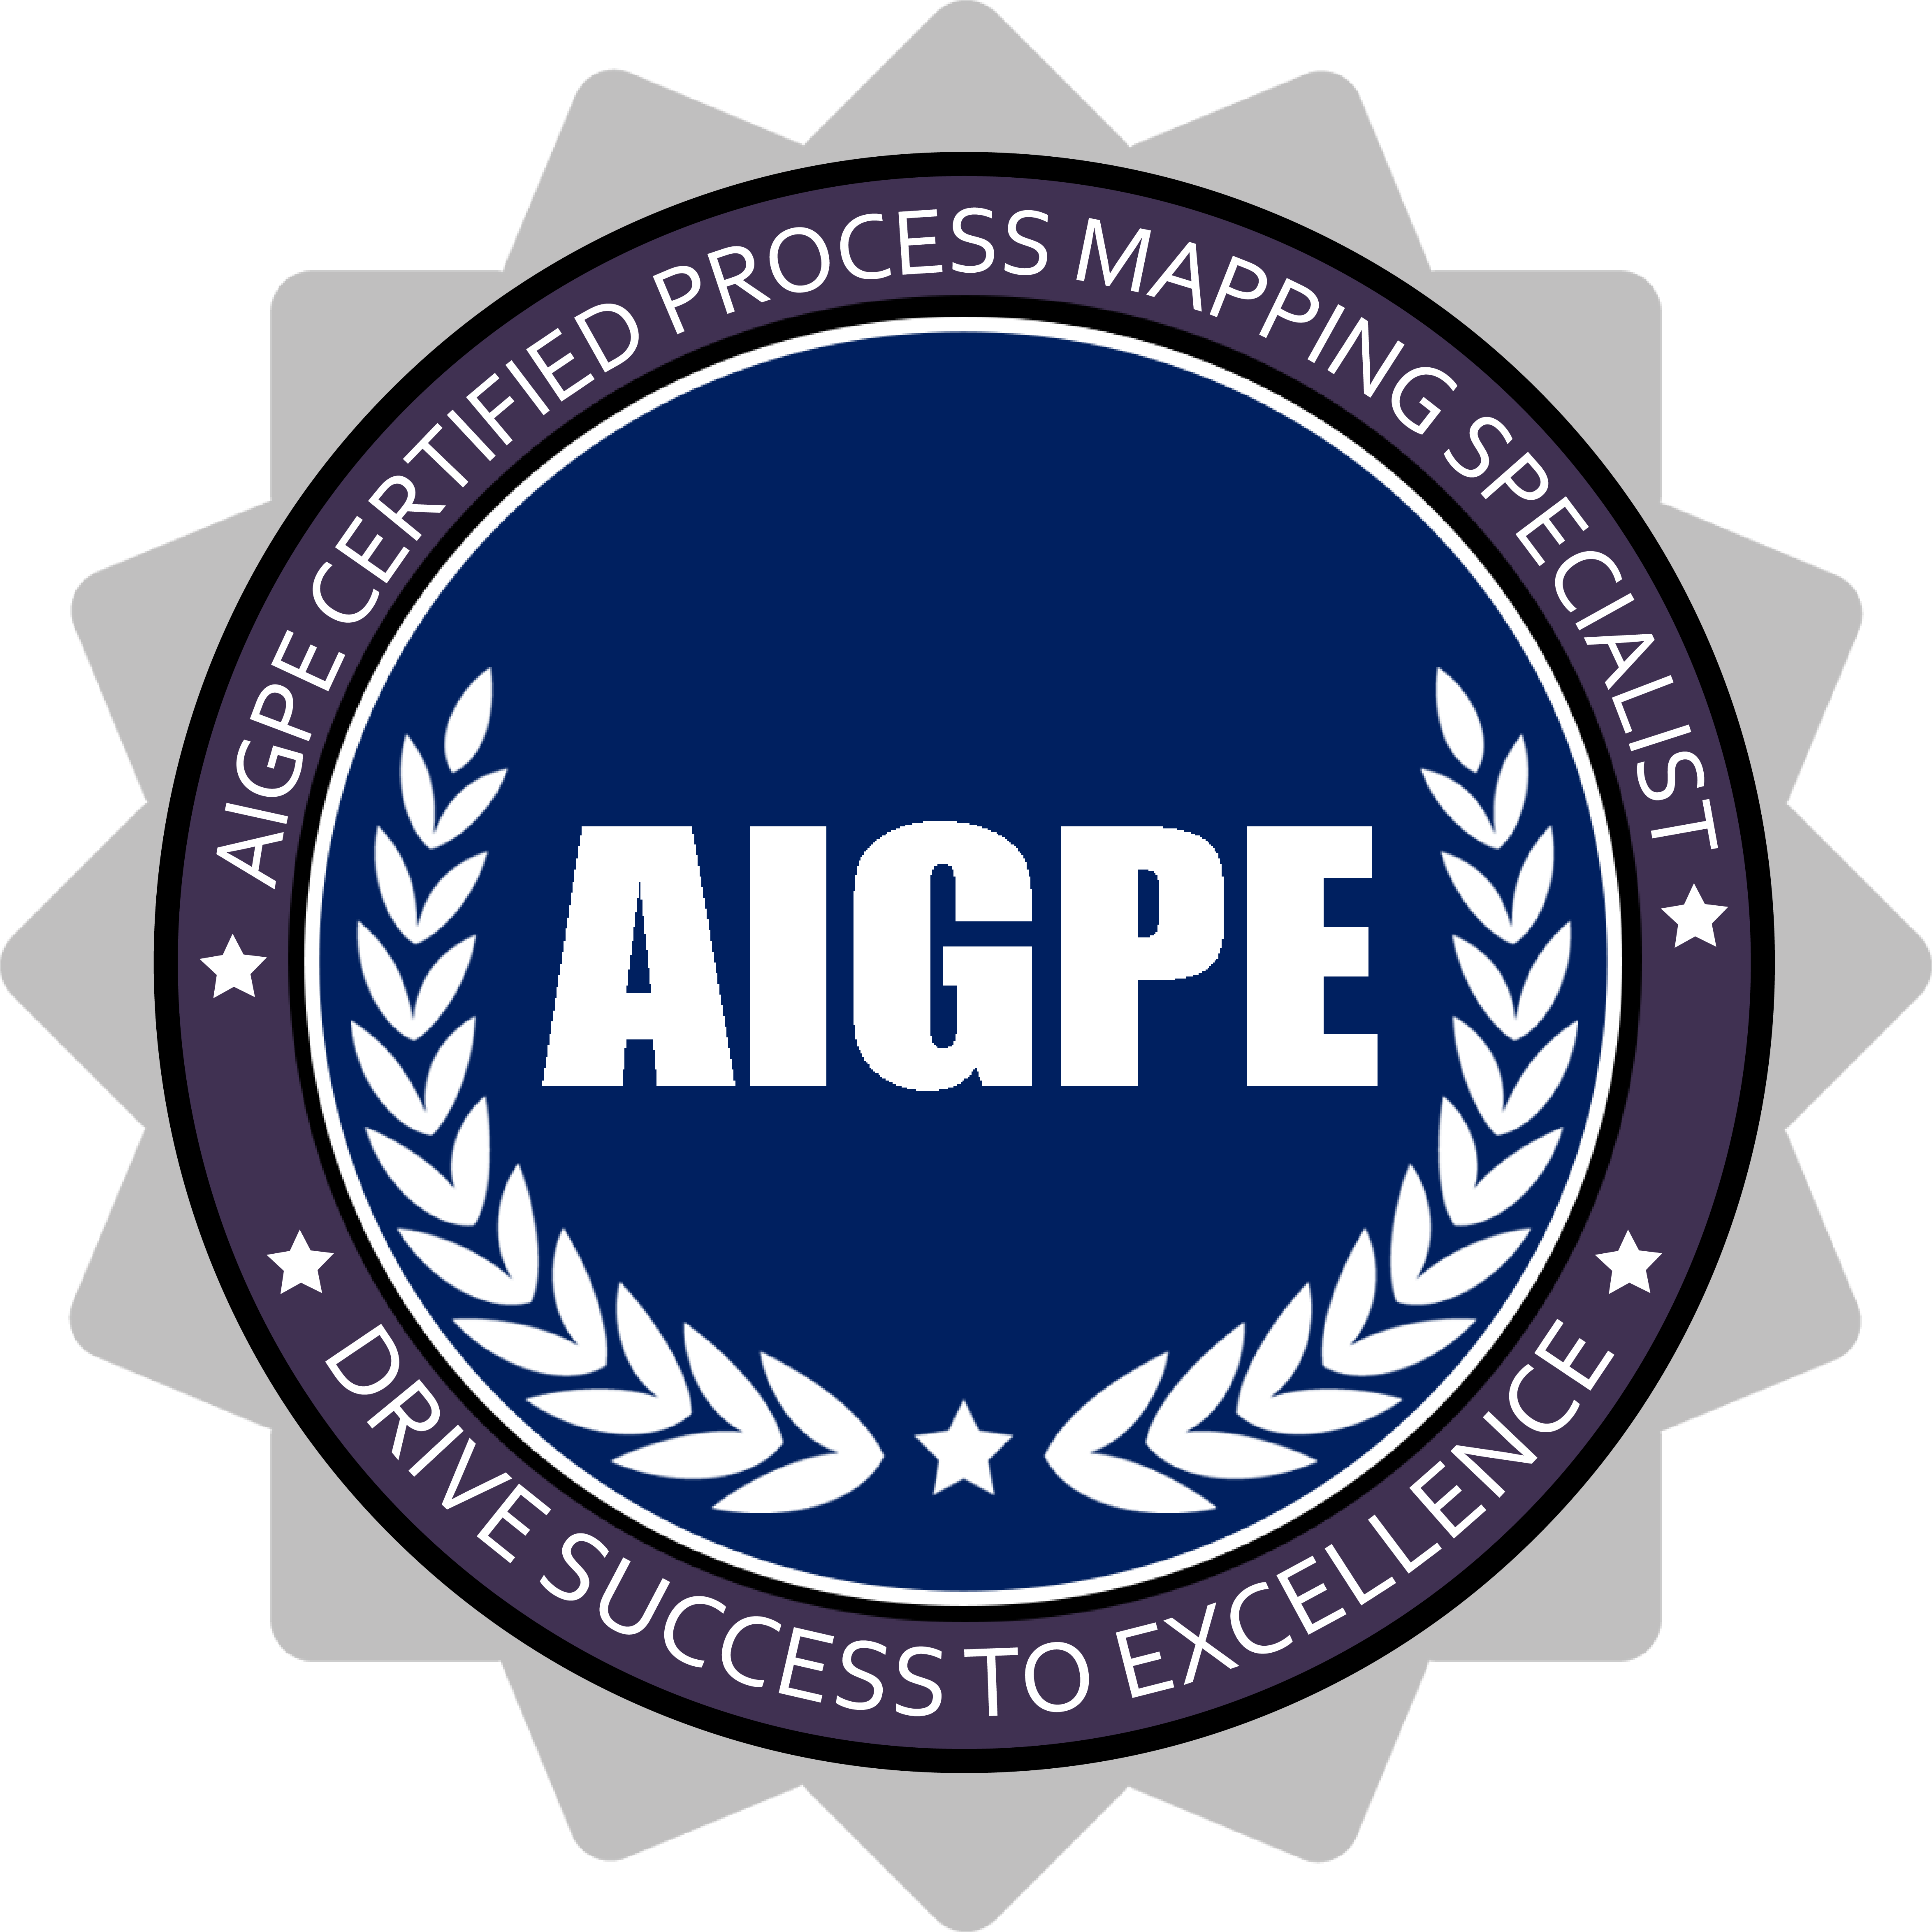 AIGPE Certified Process Mapping Specialist Badge